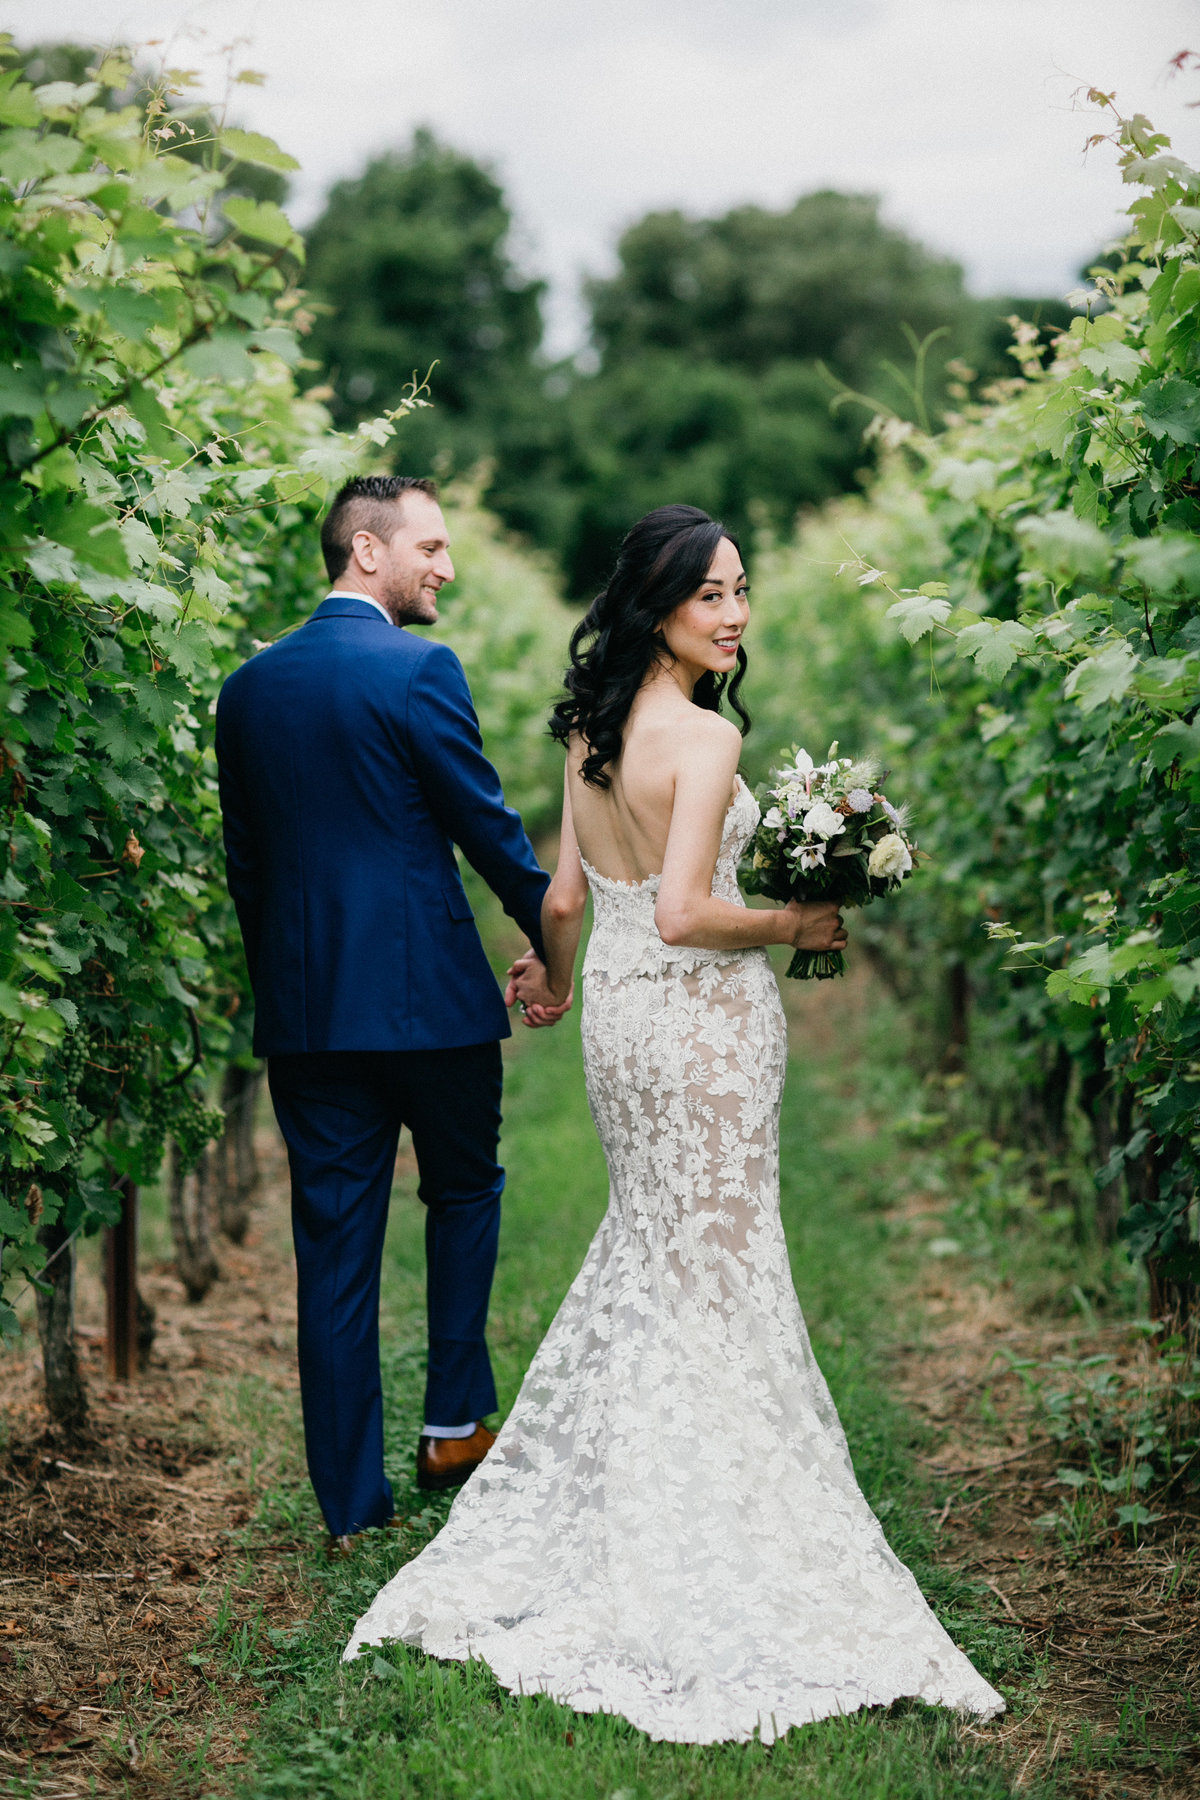 Bride and groom photographed strolling through the rows of grapes at Grace Winery.